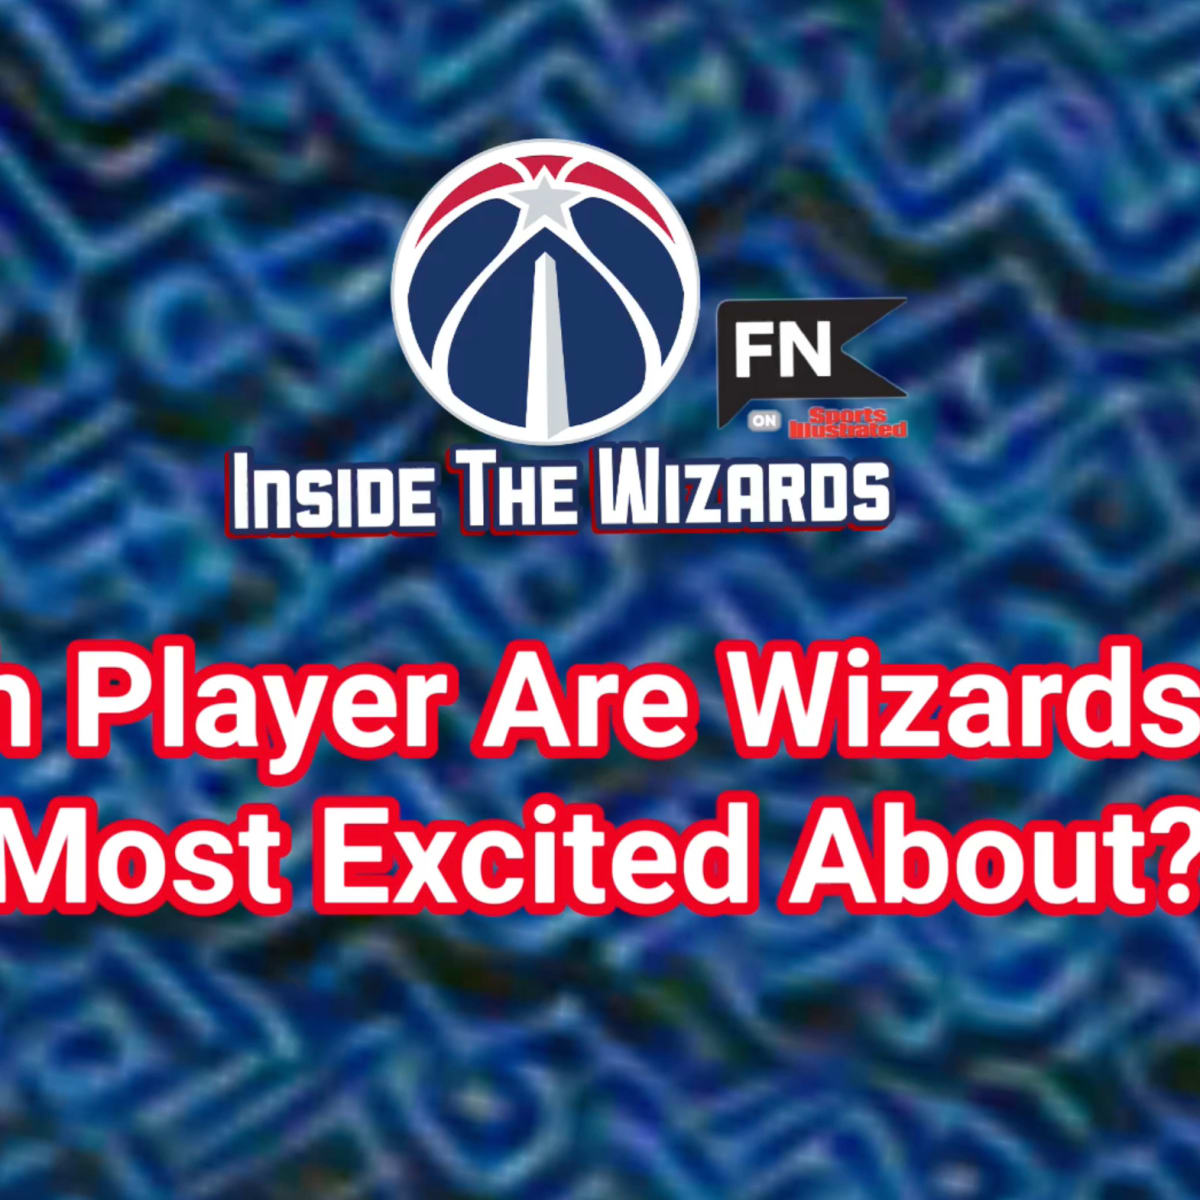 Should The Wizards Make A Change At Center? - Sports Illustrated